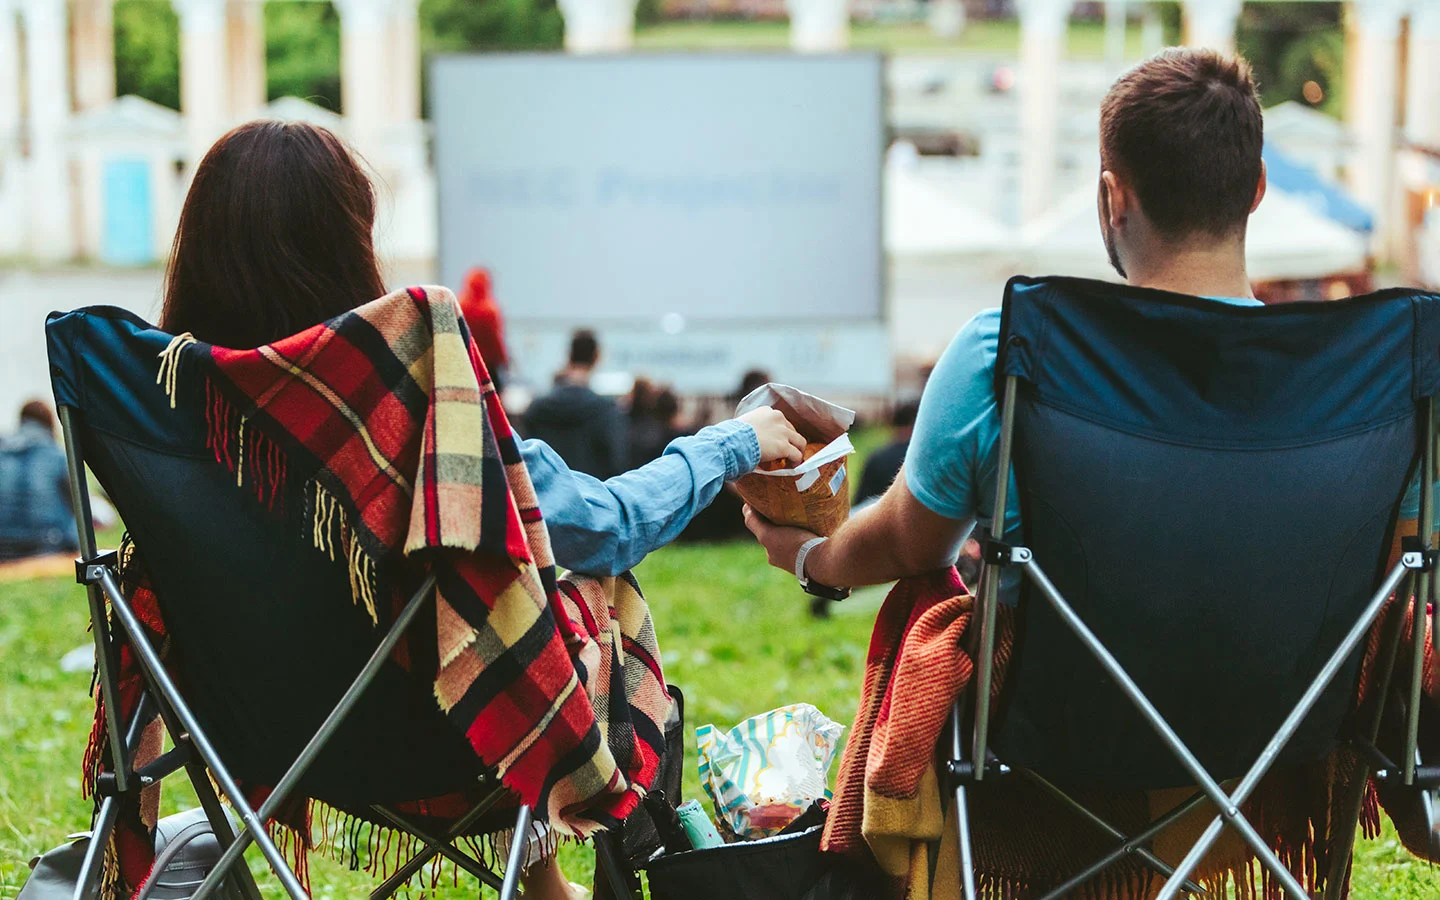 Couple at an outdoor cinema screening